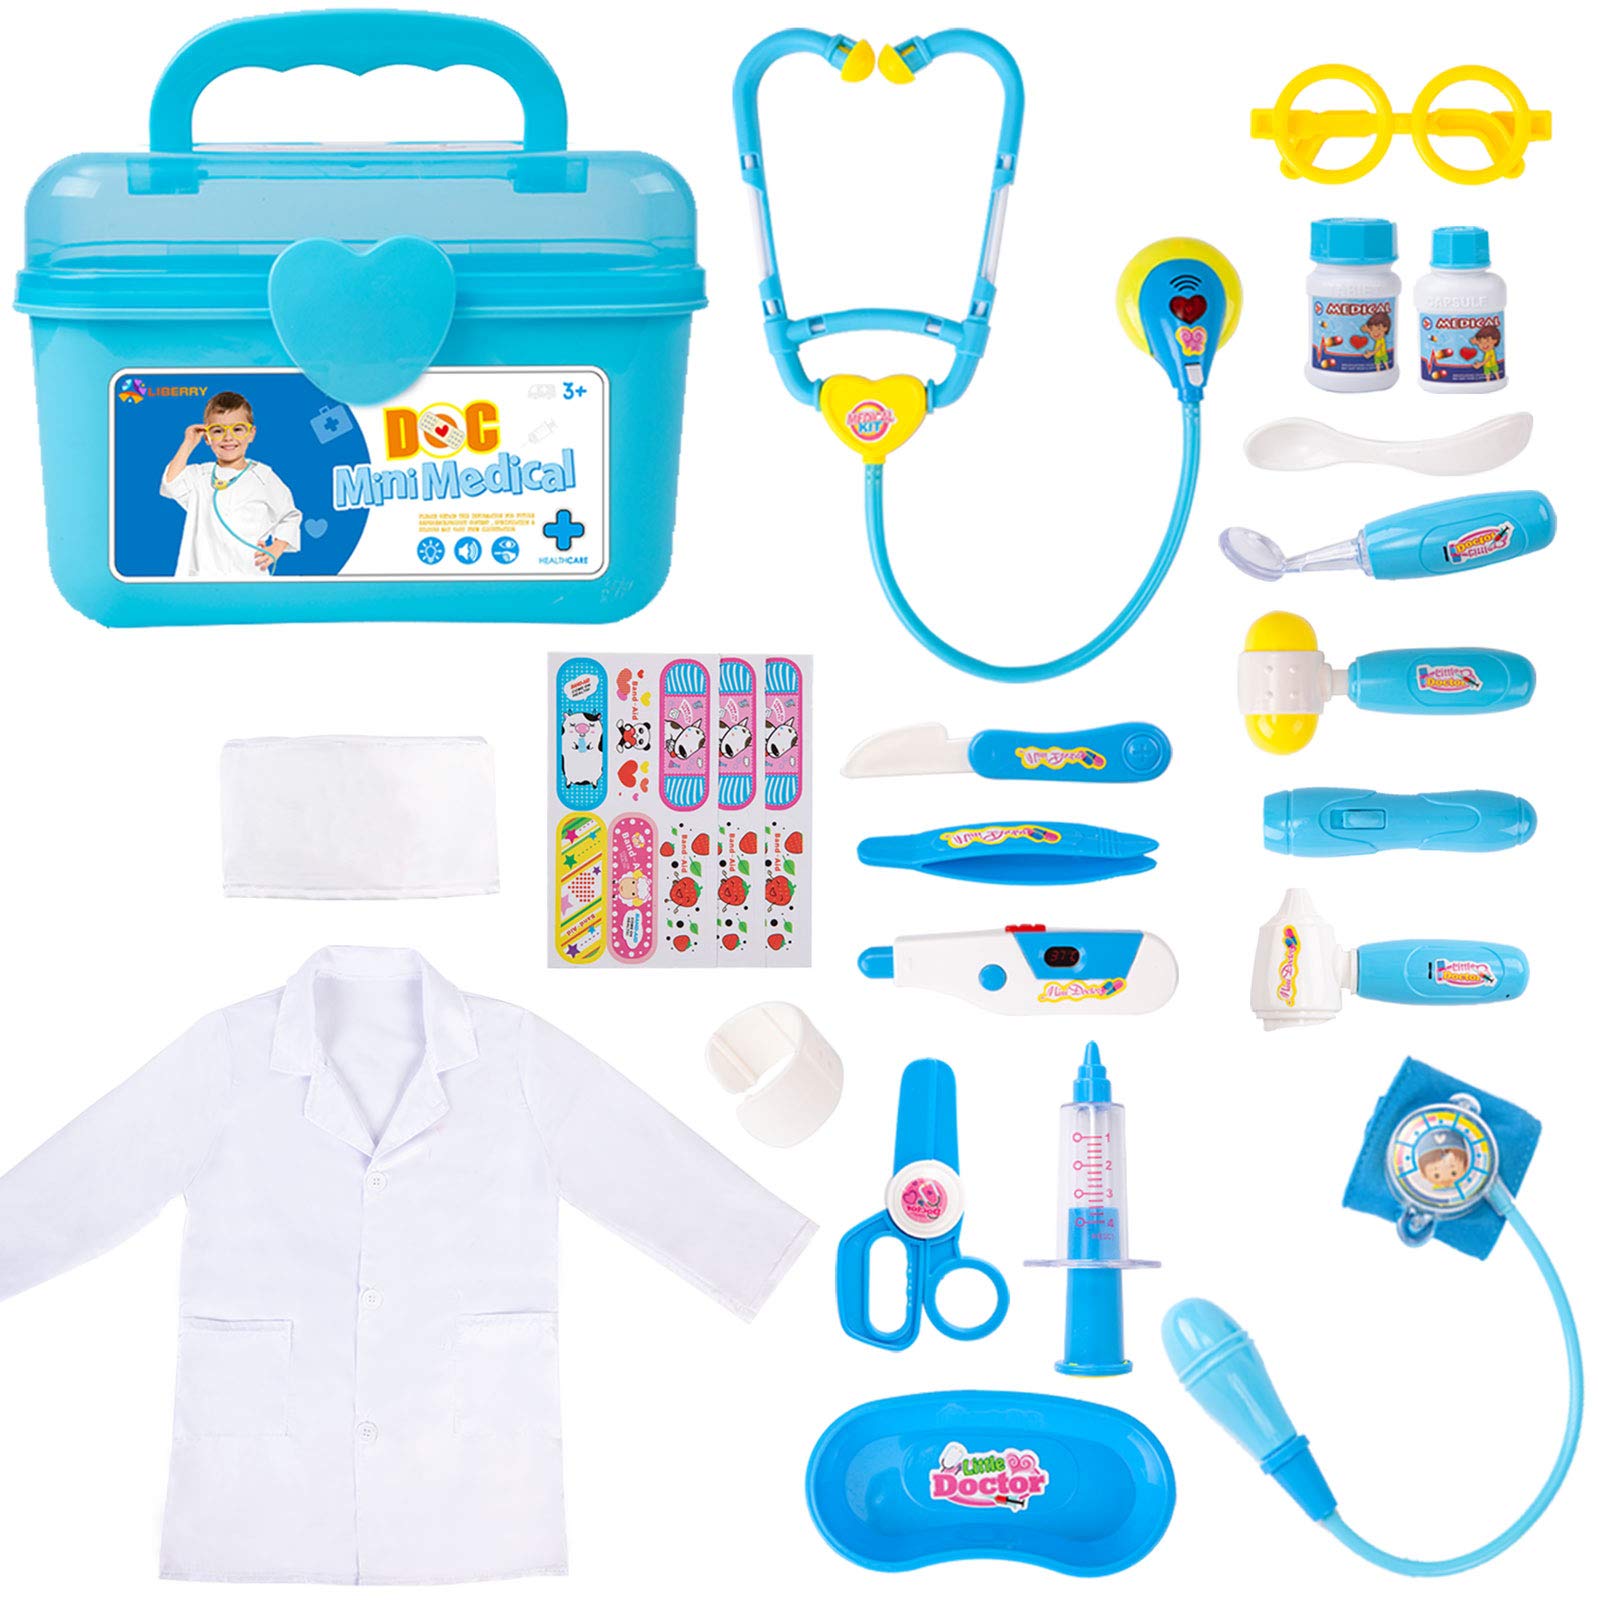 Durable Doctor Kit for Kids, 23 Pieces Pretend Play Educational Doctor Toys, Dentist Medical Kit with Stethoscope Doctor Role Play Costume, Doctor Set Toys for Toddler Boys Girls 3 4 5 6 7 8 Years Old